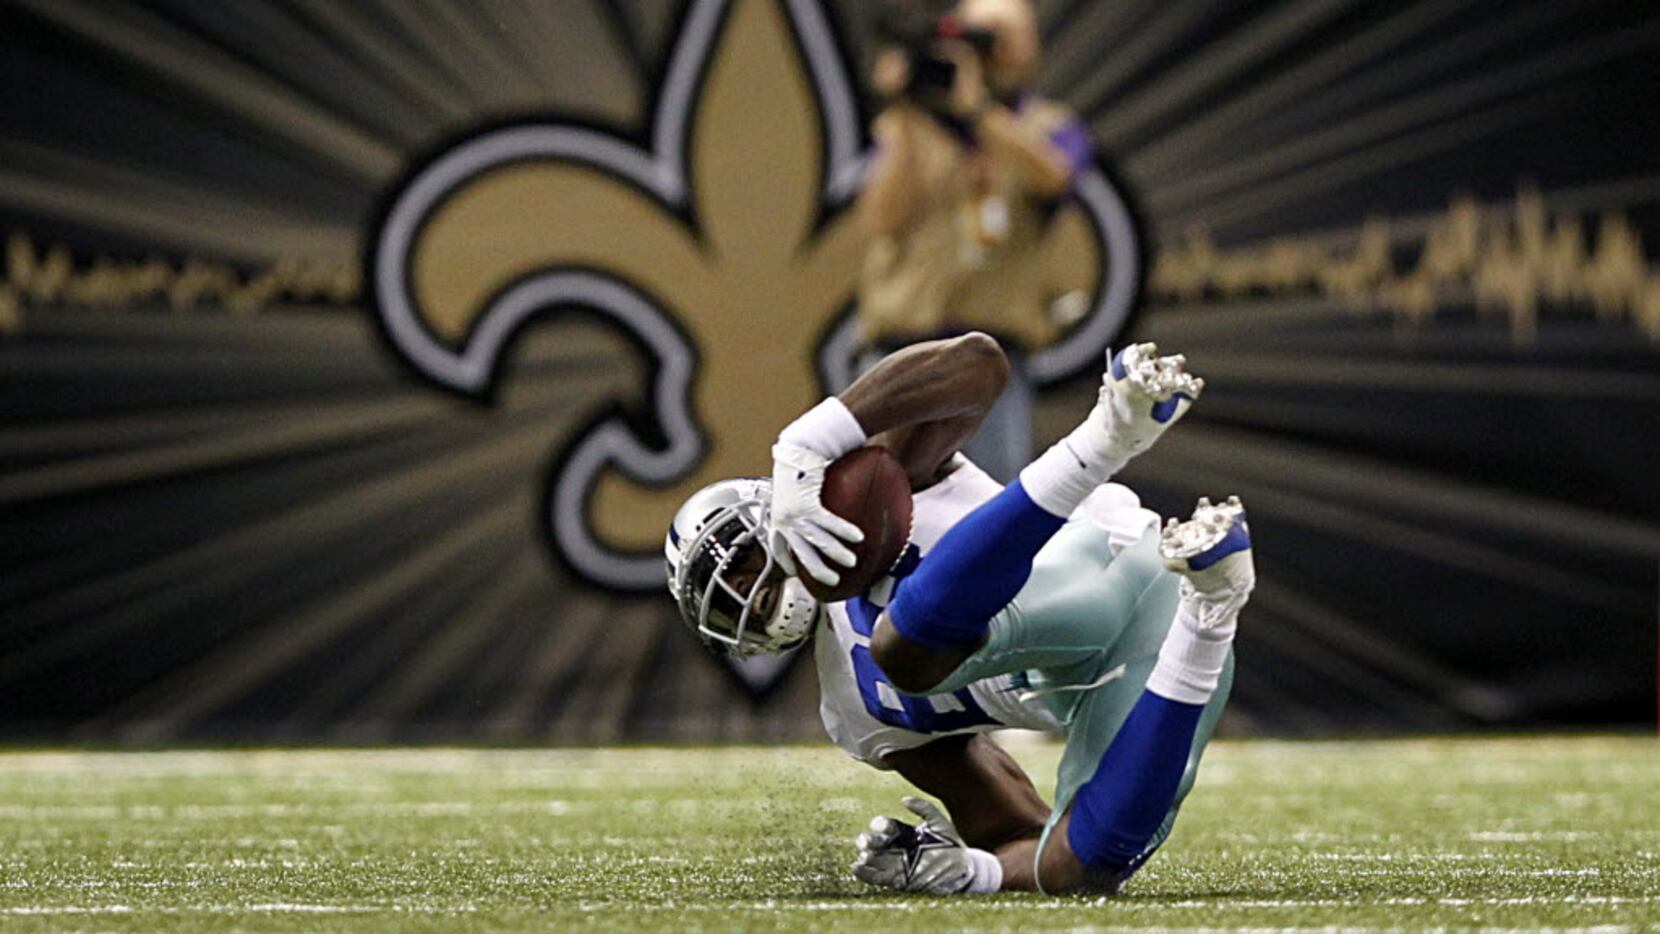 So when will former Cowboys WR Dez Bryant take the field for the Saints?  Here's what Sean Payton said